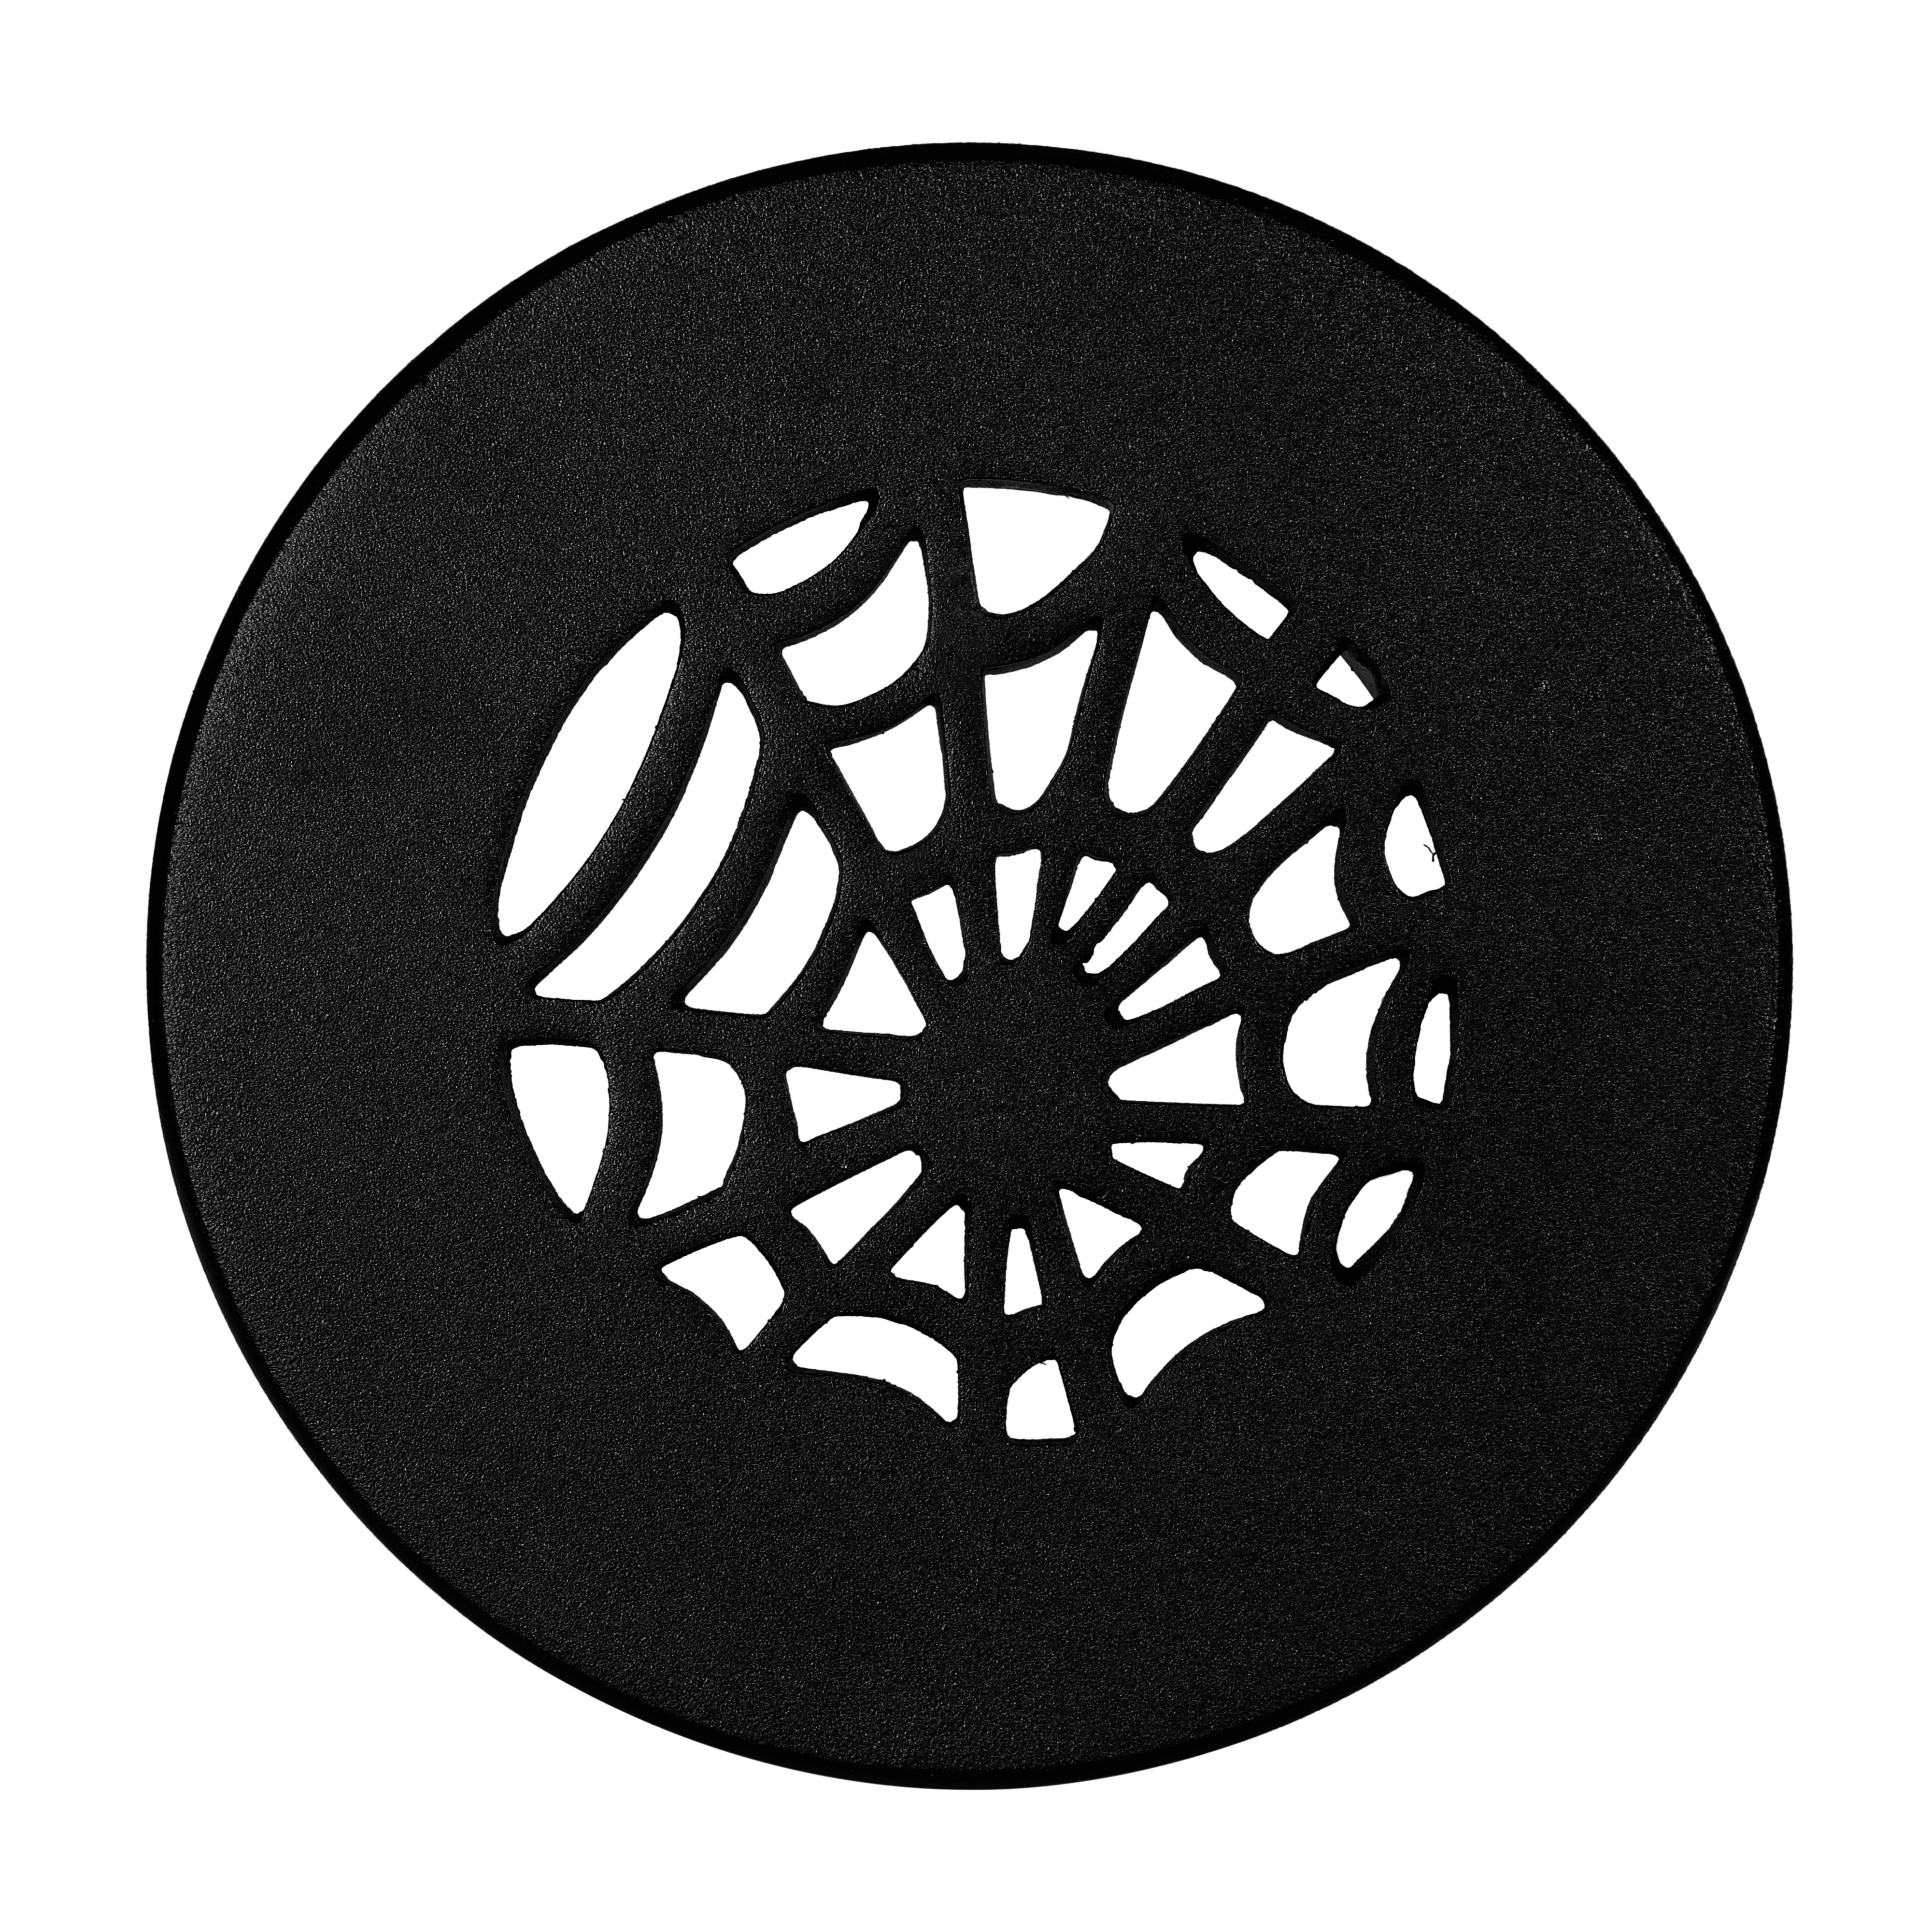 Spooky Gothic 5"Round Solid Cast Aluminum Grille | Powder Coated